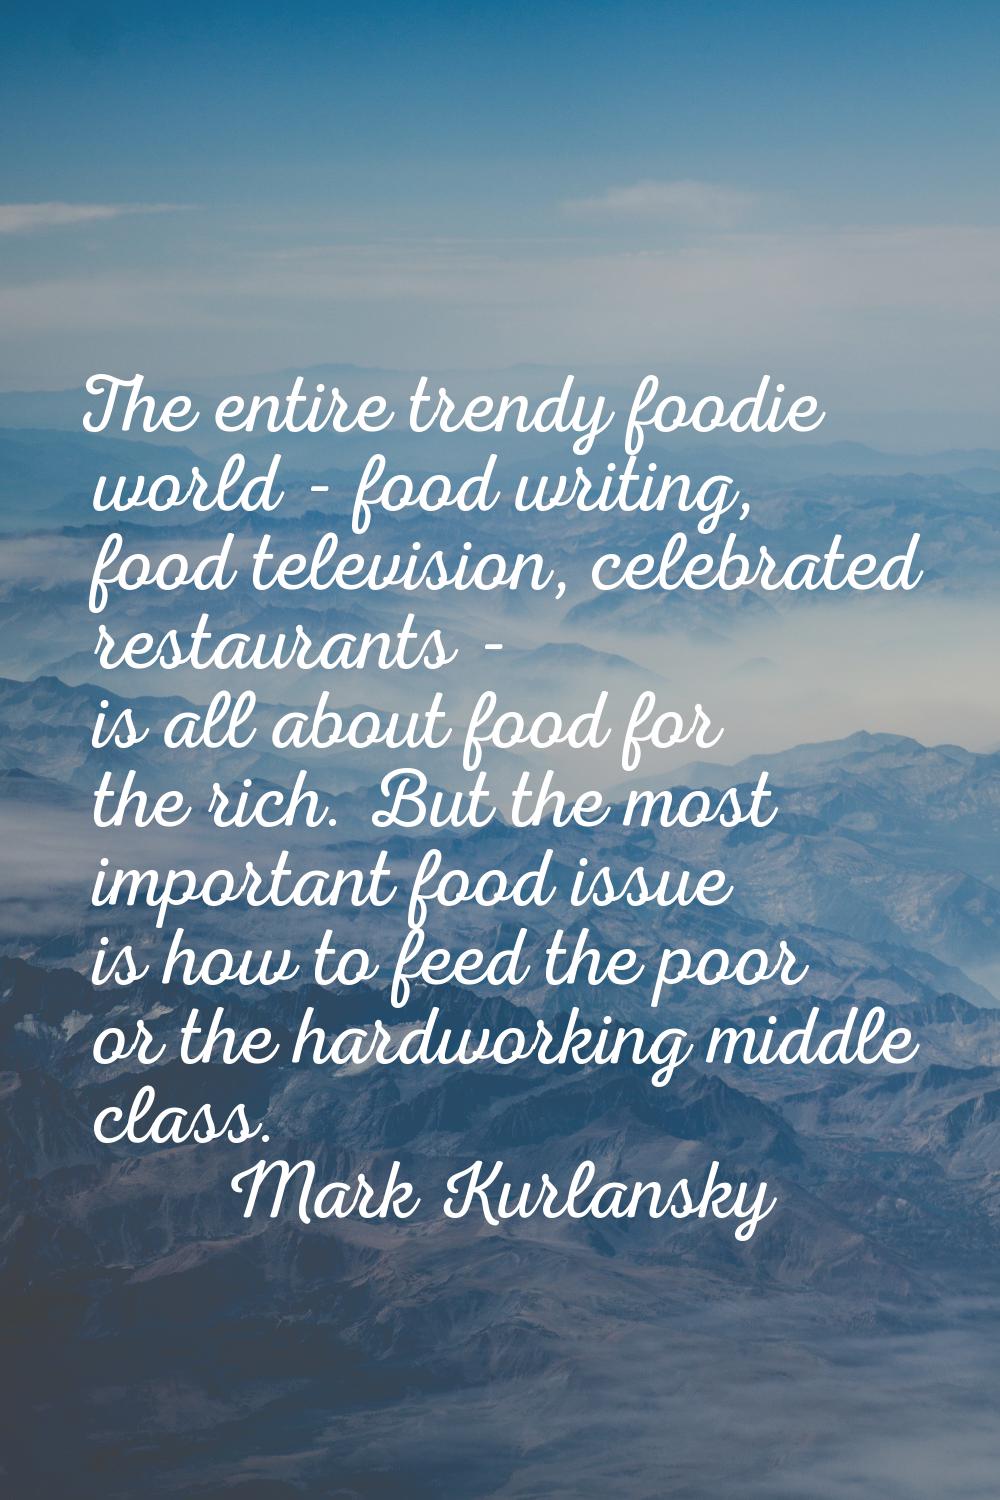 The entire trendy foodie world - food writing, food television, celebrated restaurants - is all abo